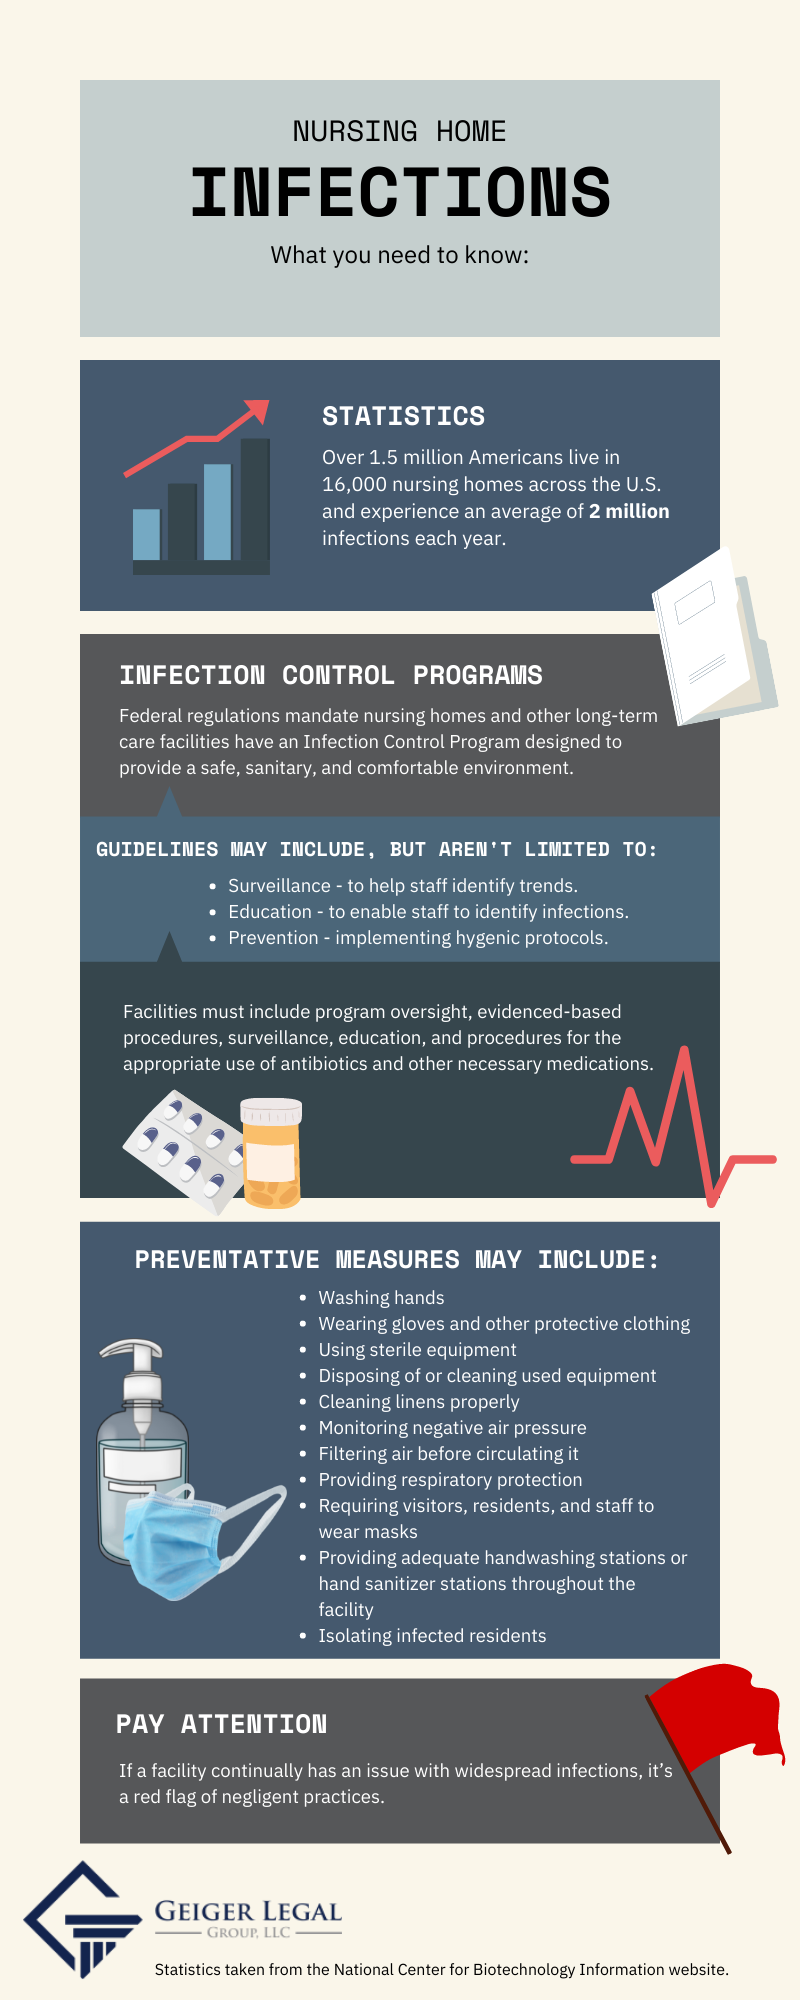 Infographic on Nursing Home Infections